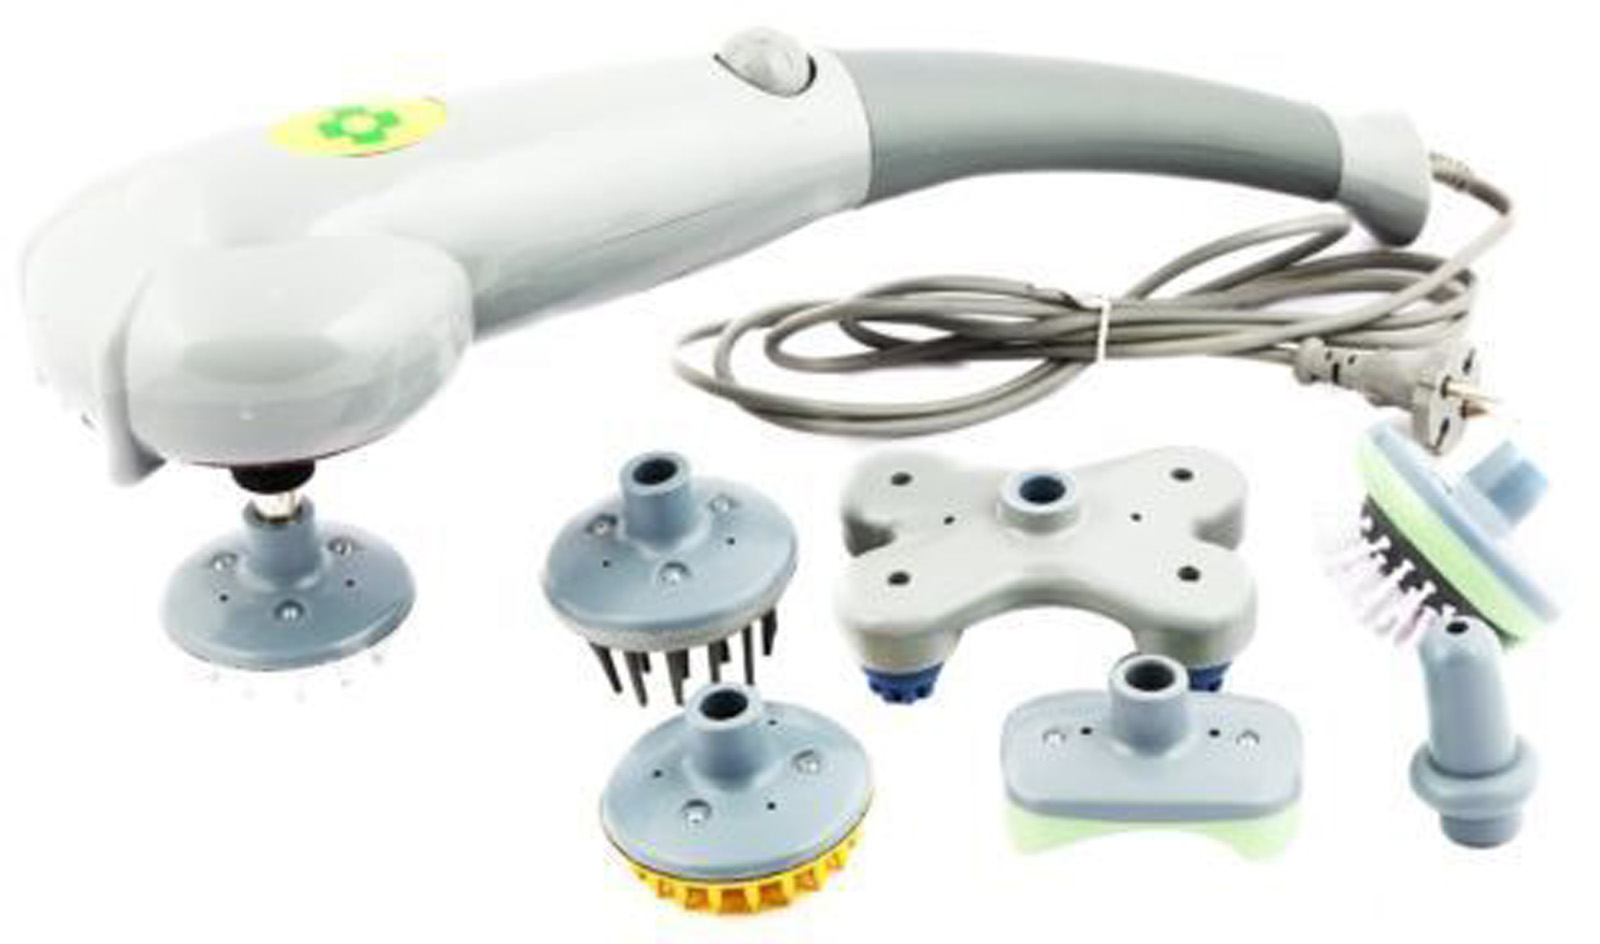 Buy Maxtop Magic Massager For Full Body Massage With 7 Attachments Online ₹1680 From Shopclues